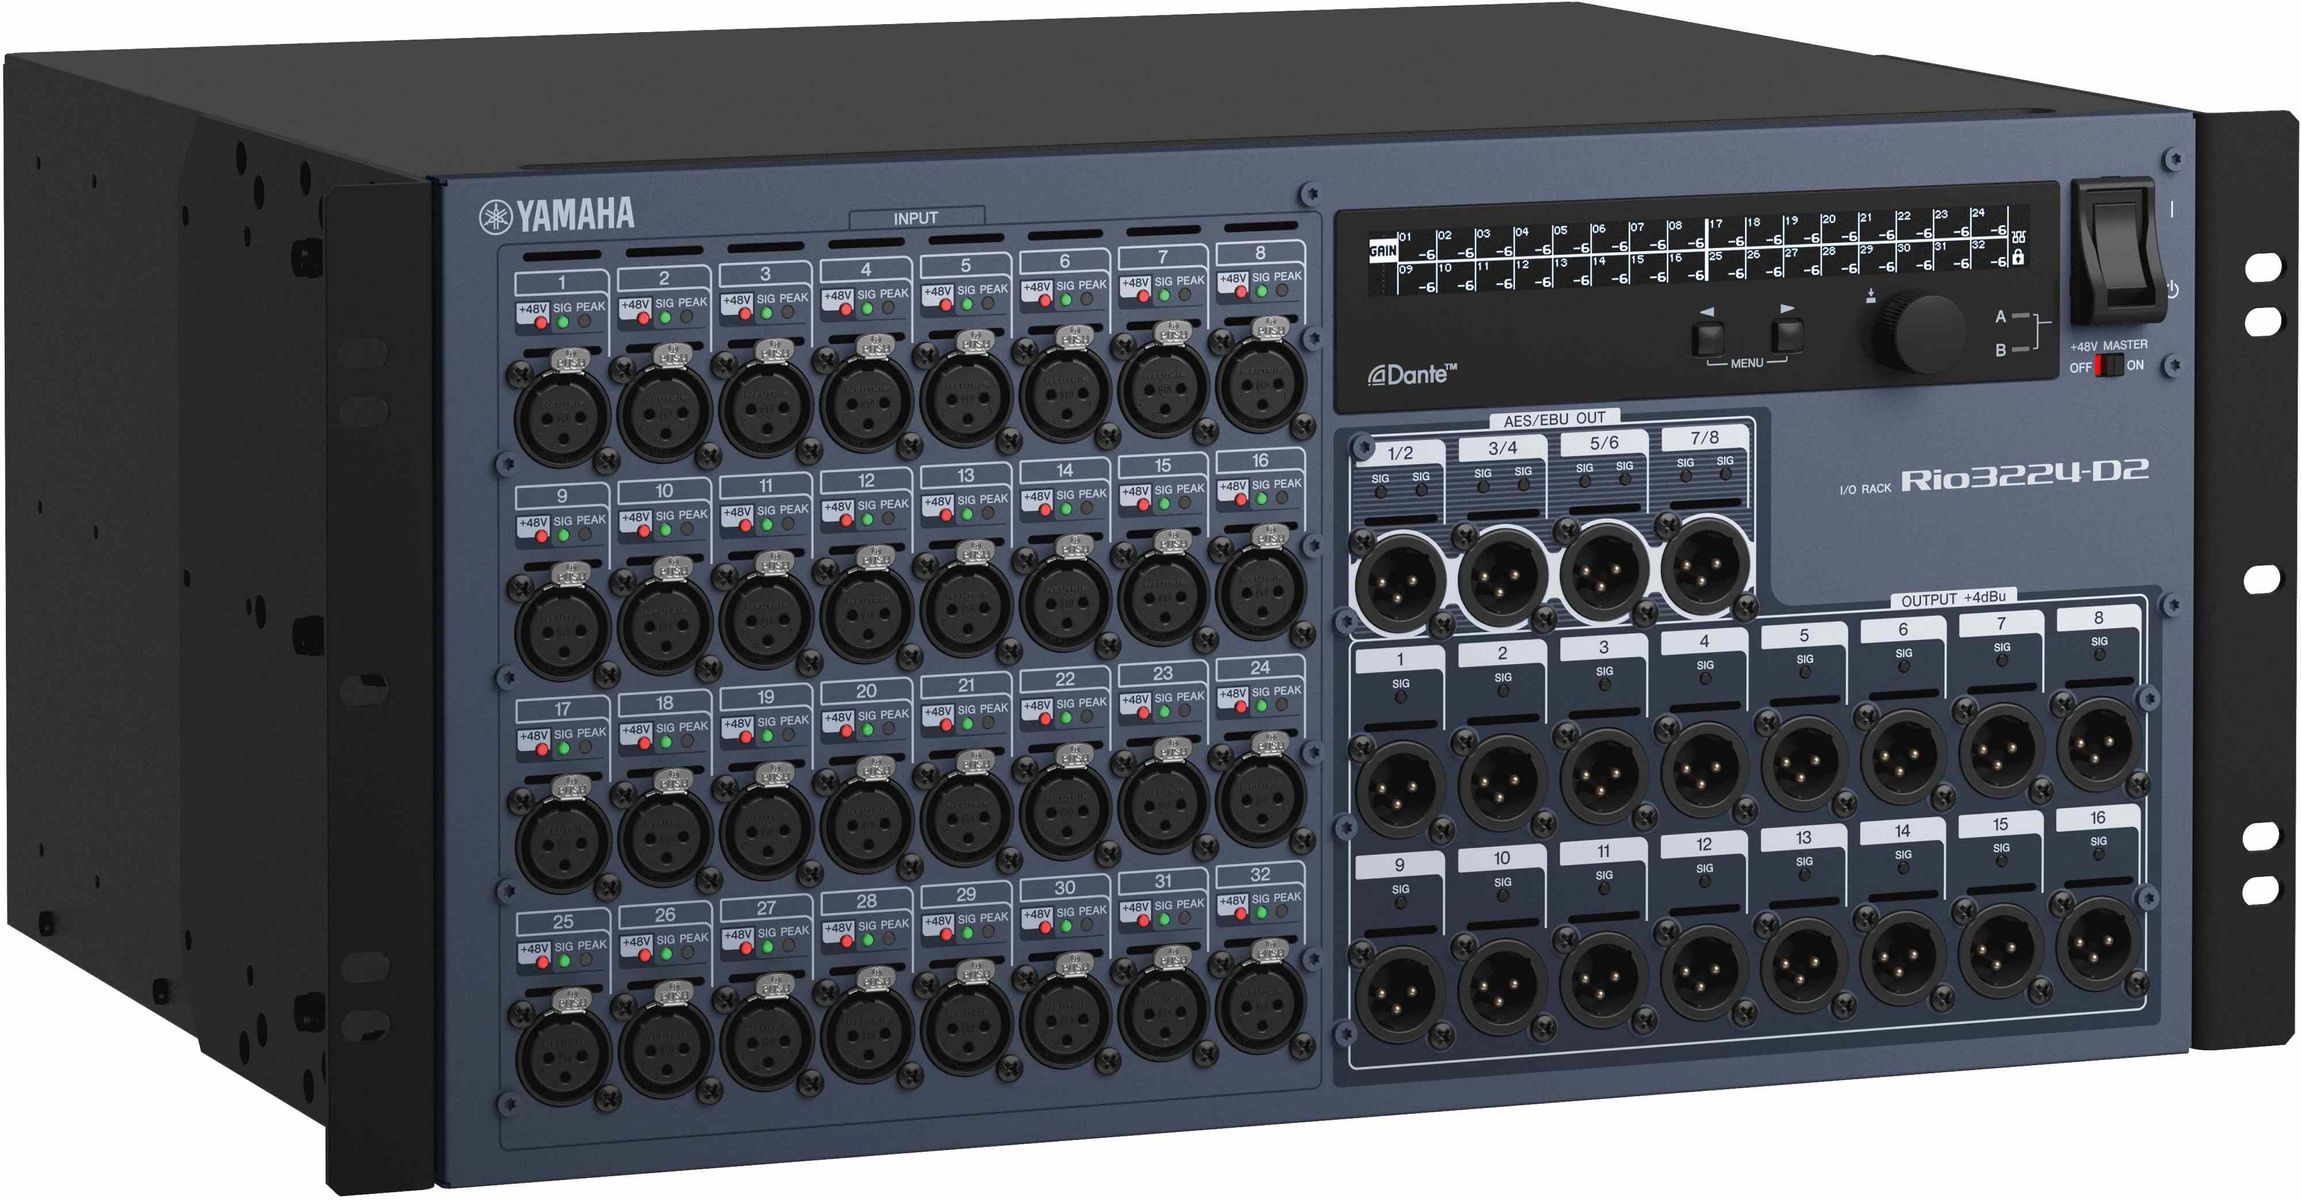 Yamaha's RIO3224-D2 Dante Stagebox is at Hollywood Sound Systems.